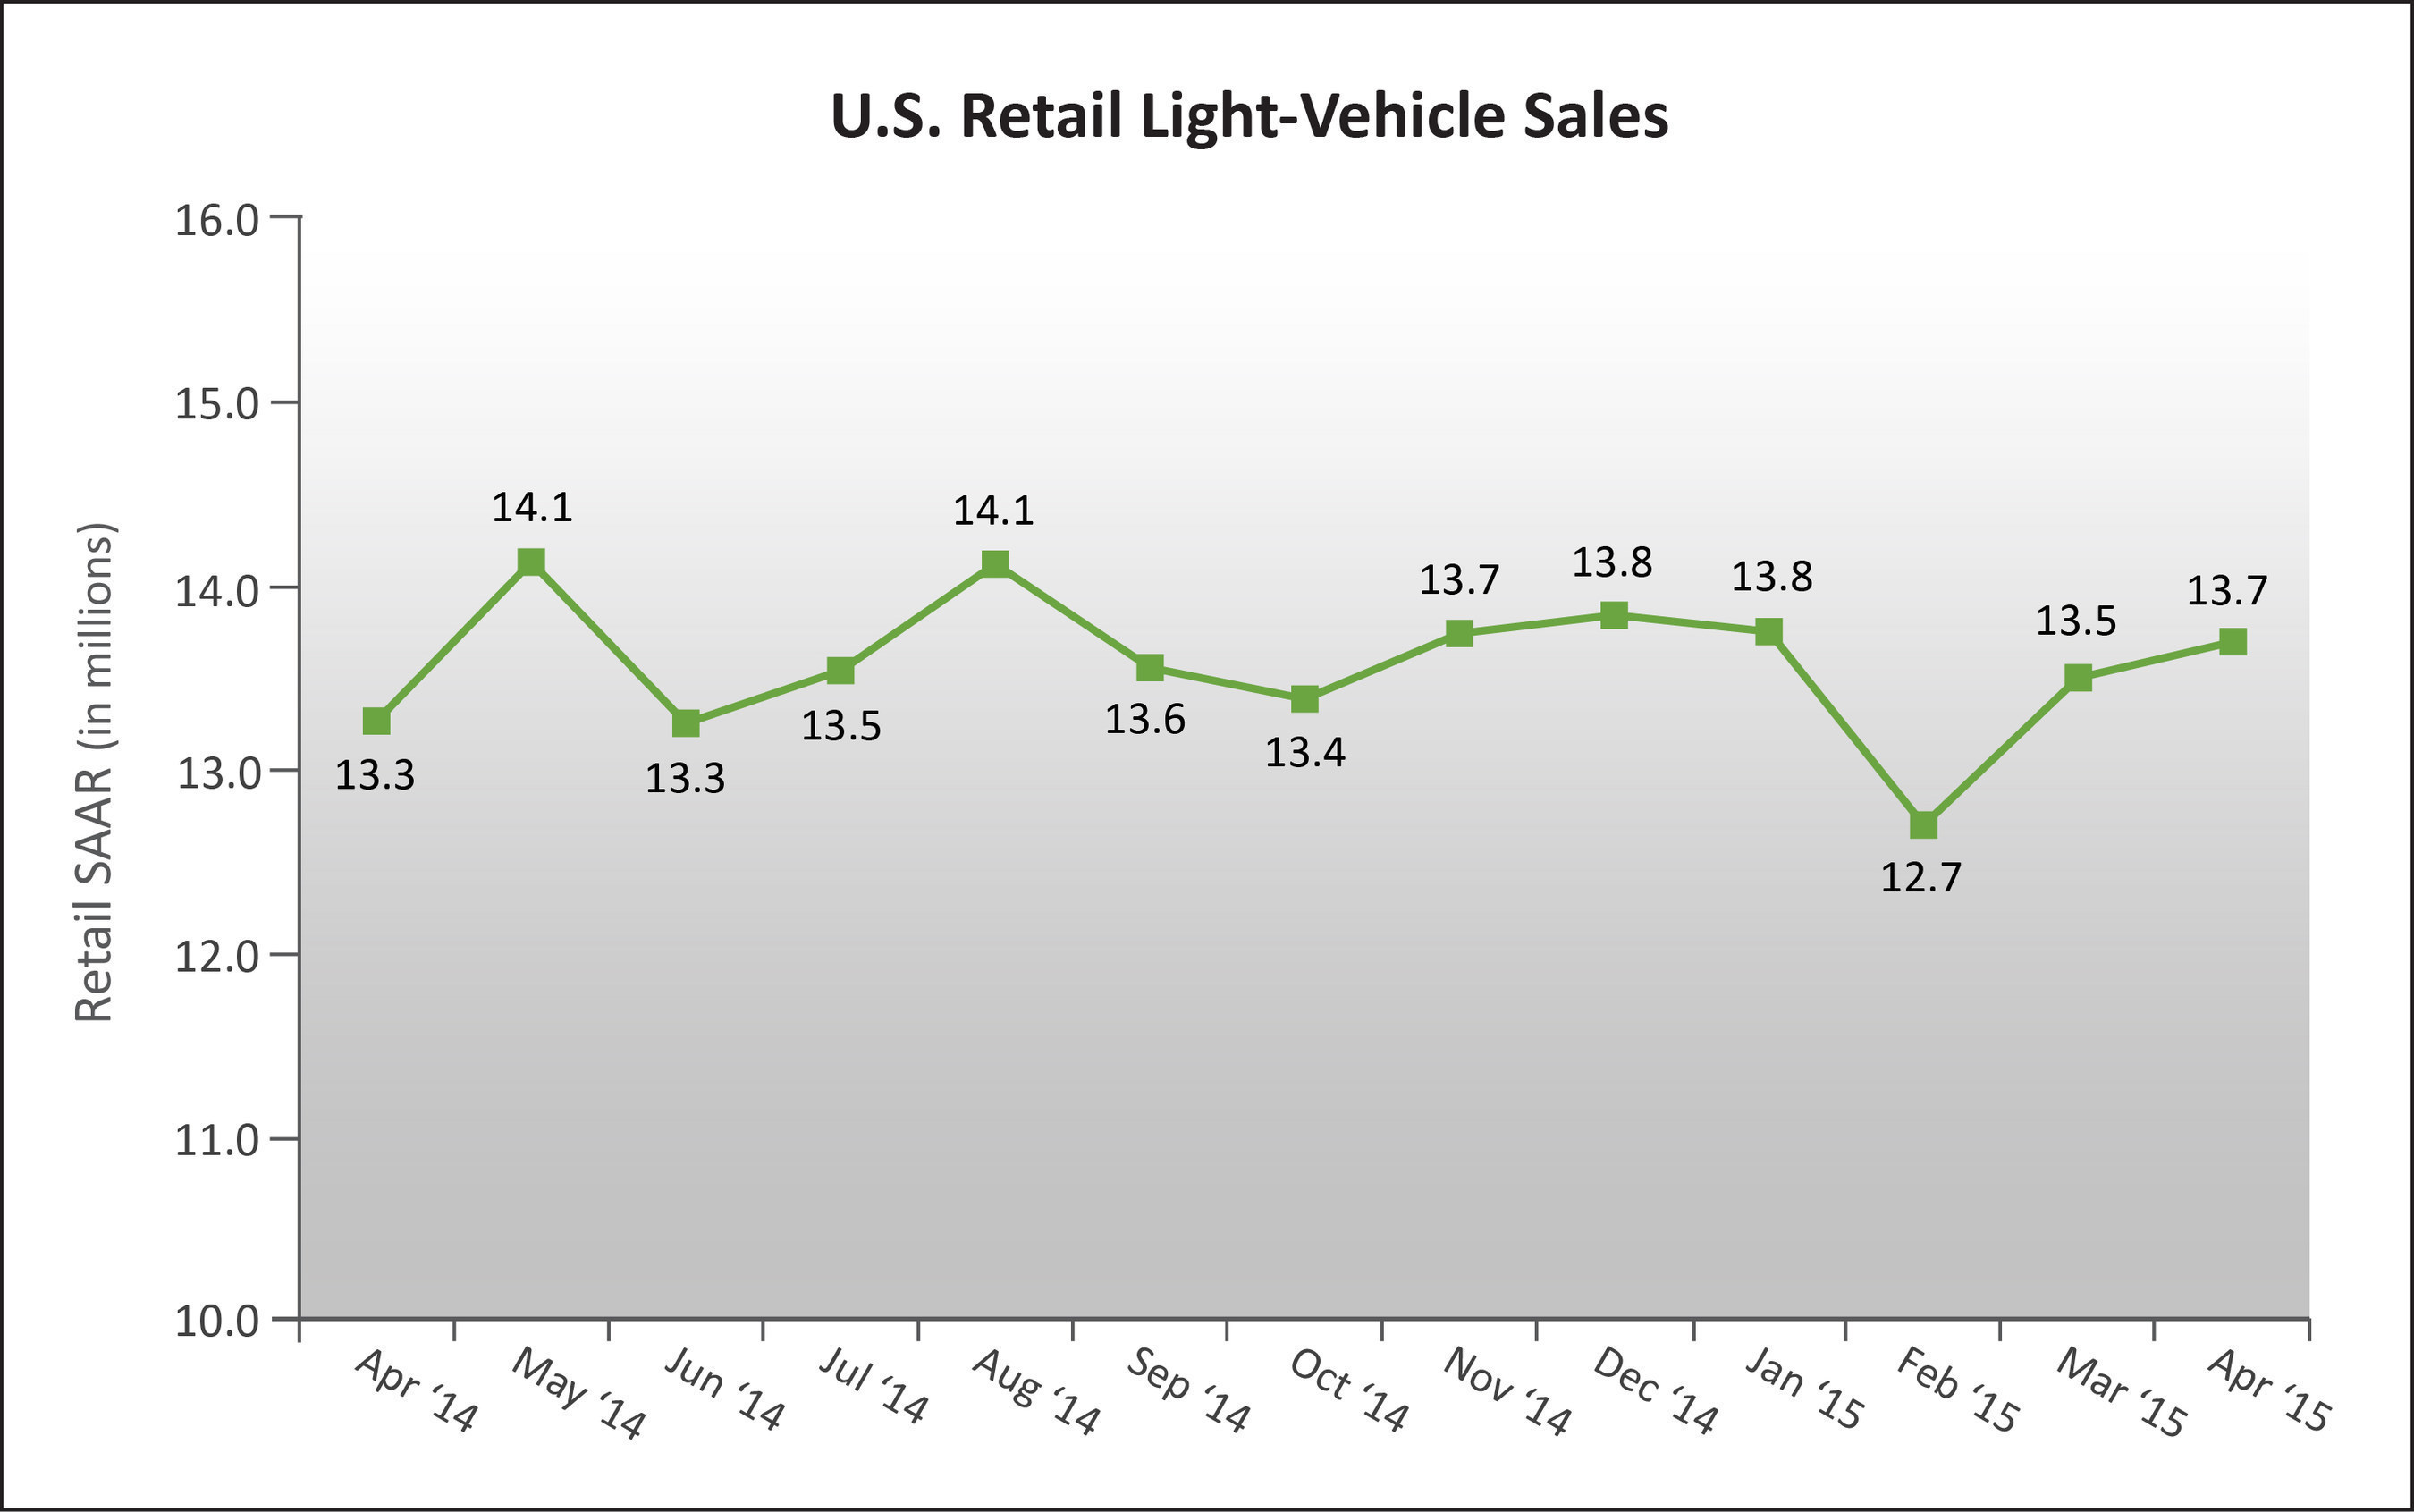 U.S. Retail SAAR-April 2014 to April 2015(in millions of units)Source: Power Information Network? (PIN) from J.D. Power